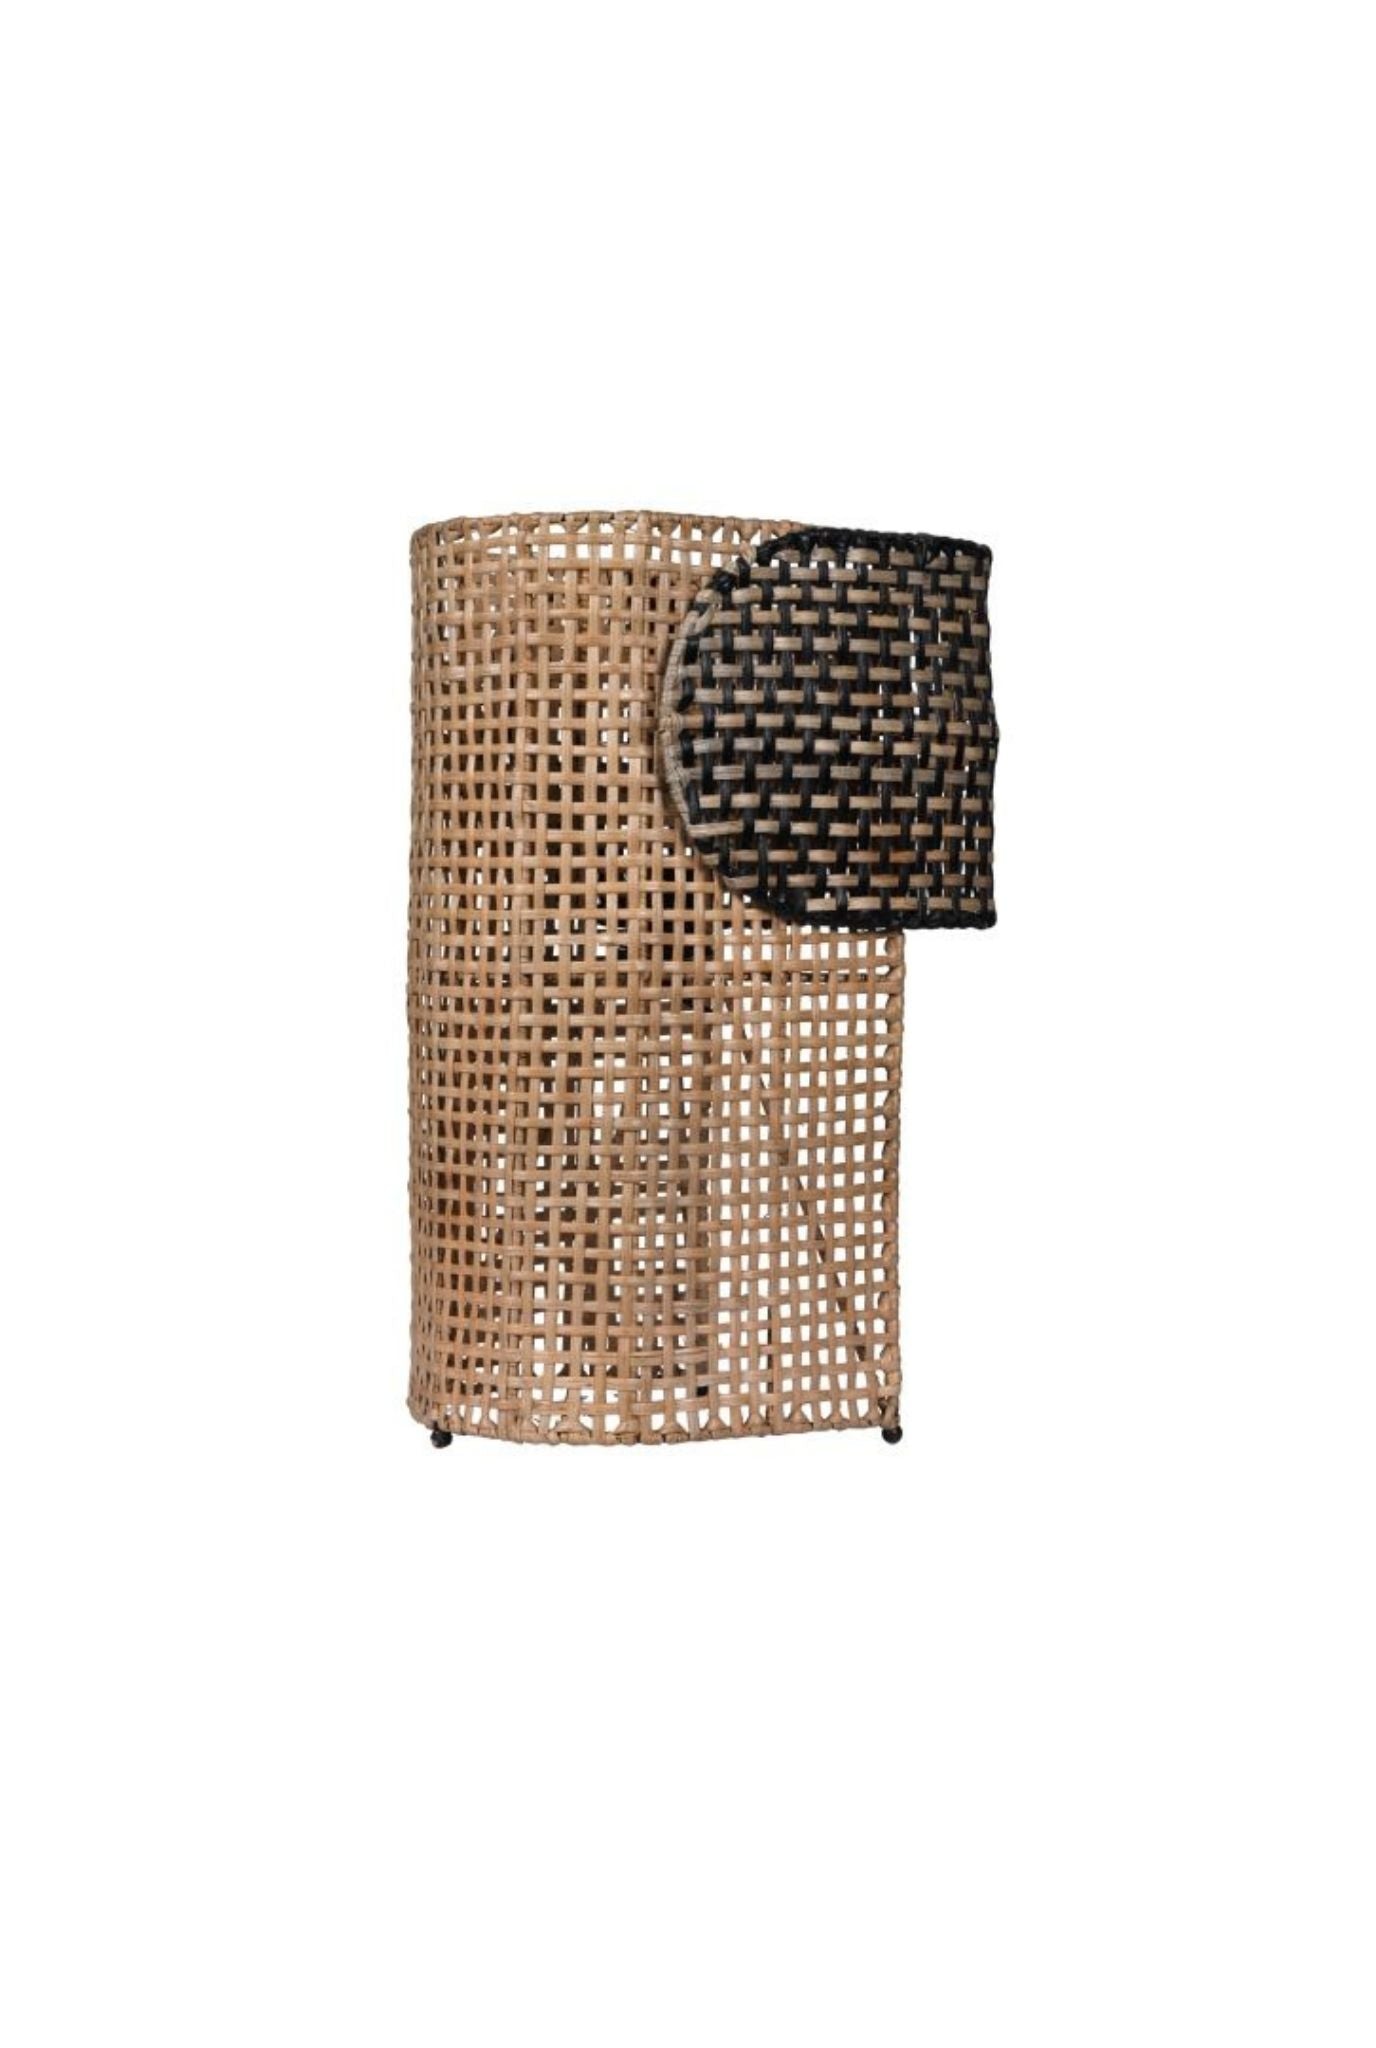 Aboi Cane Table Lamp (SHIPPING ONLY IN INDIA)